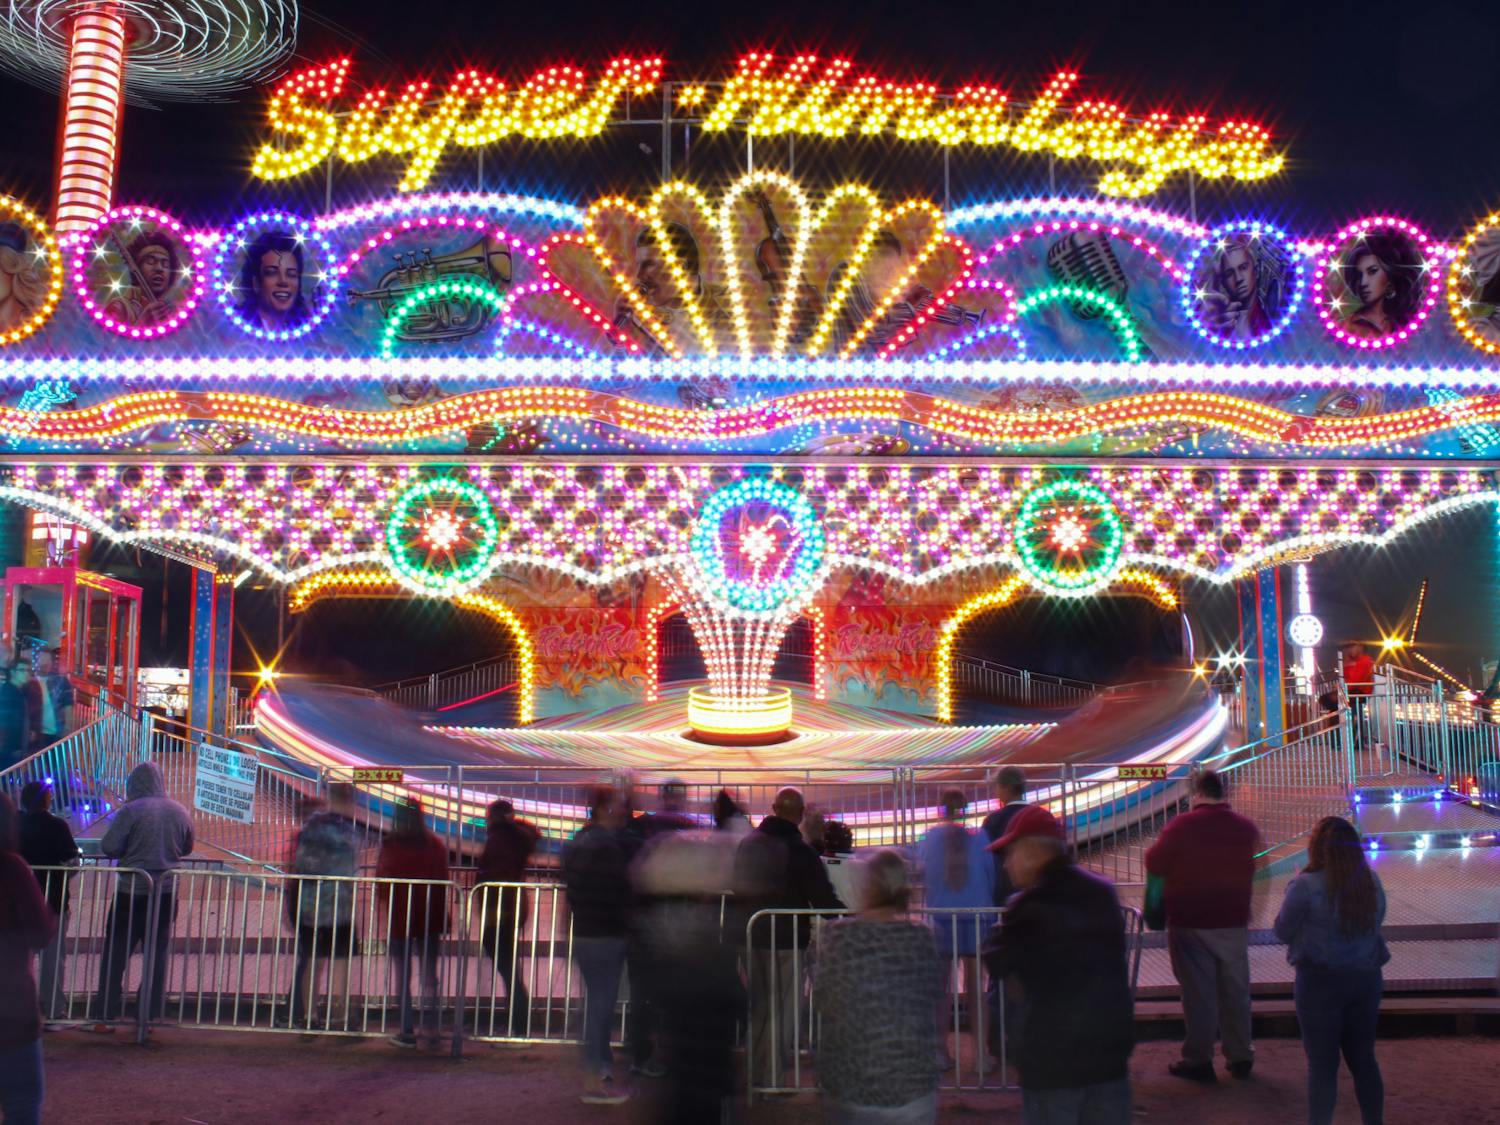 The Super Himalaya, a ride that features loud music and a wavy, speedy spinning motion, sits in the fairgrounds on Oct. 23, 2022. The structure moves riders forward and backwards at high speeds, making fair attendees dizzy and in risk of losing their lunch.&nbsp;